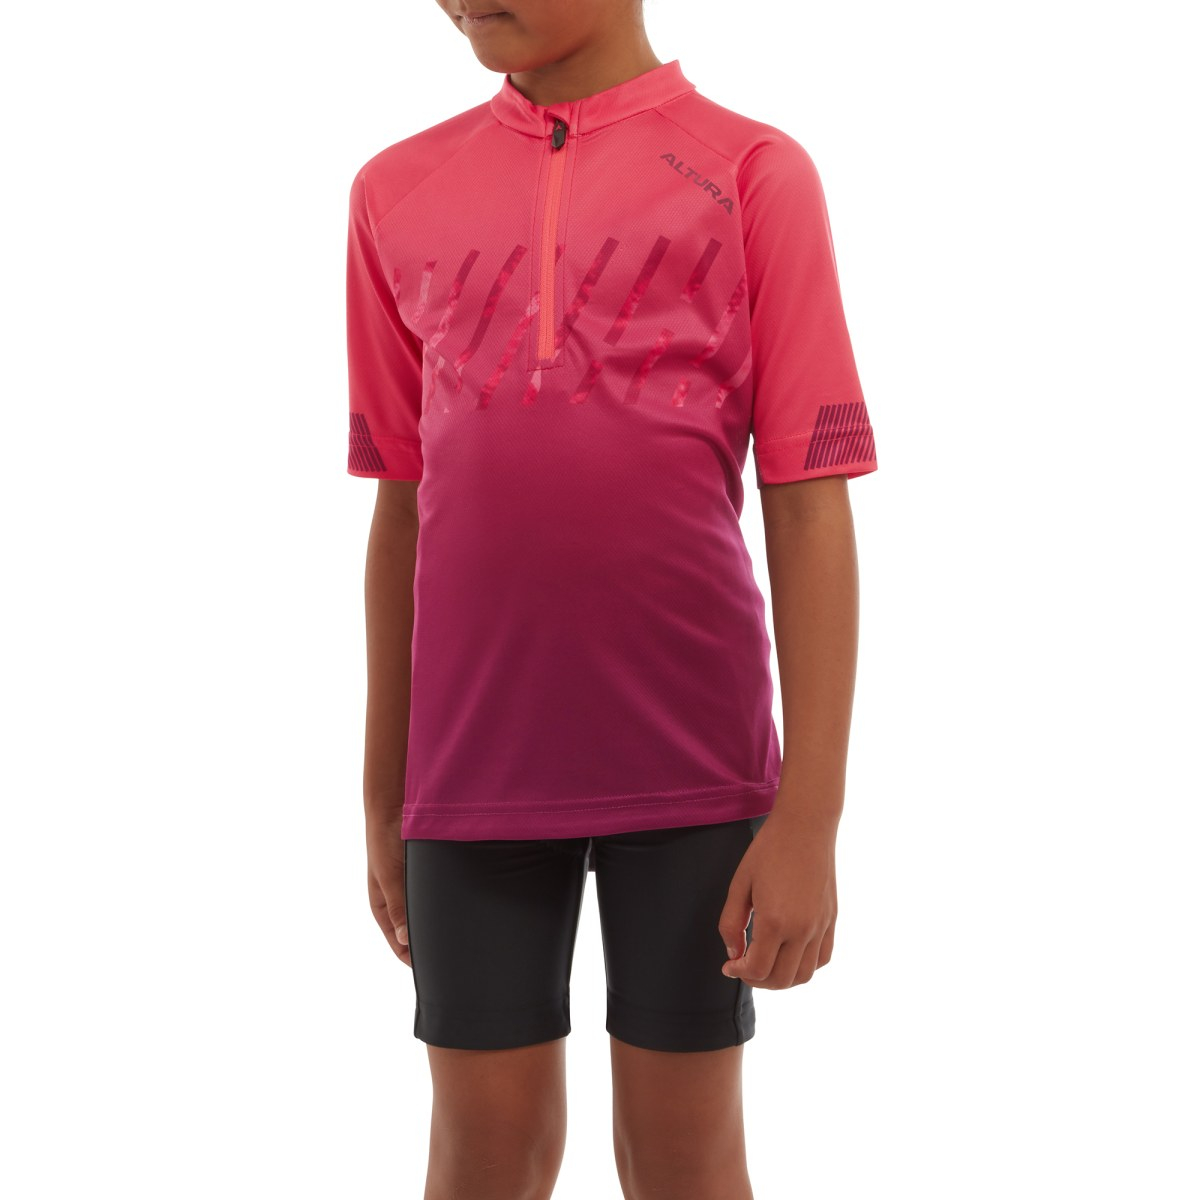 Altura  Kids Airstream Short Sleeve Cycling Jersey 7 to 8 Years PINK